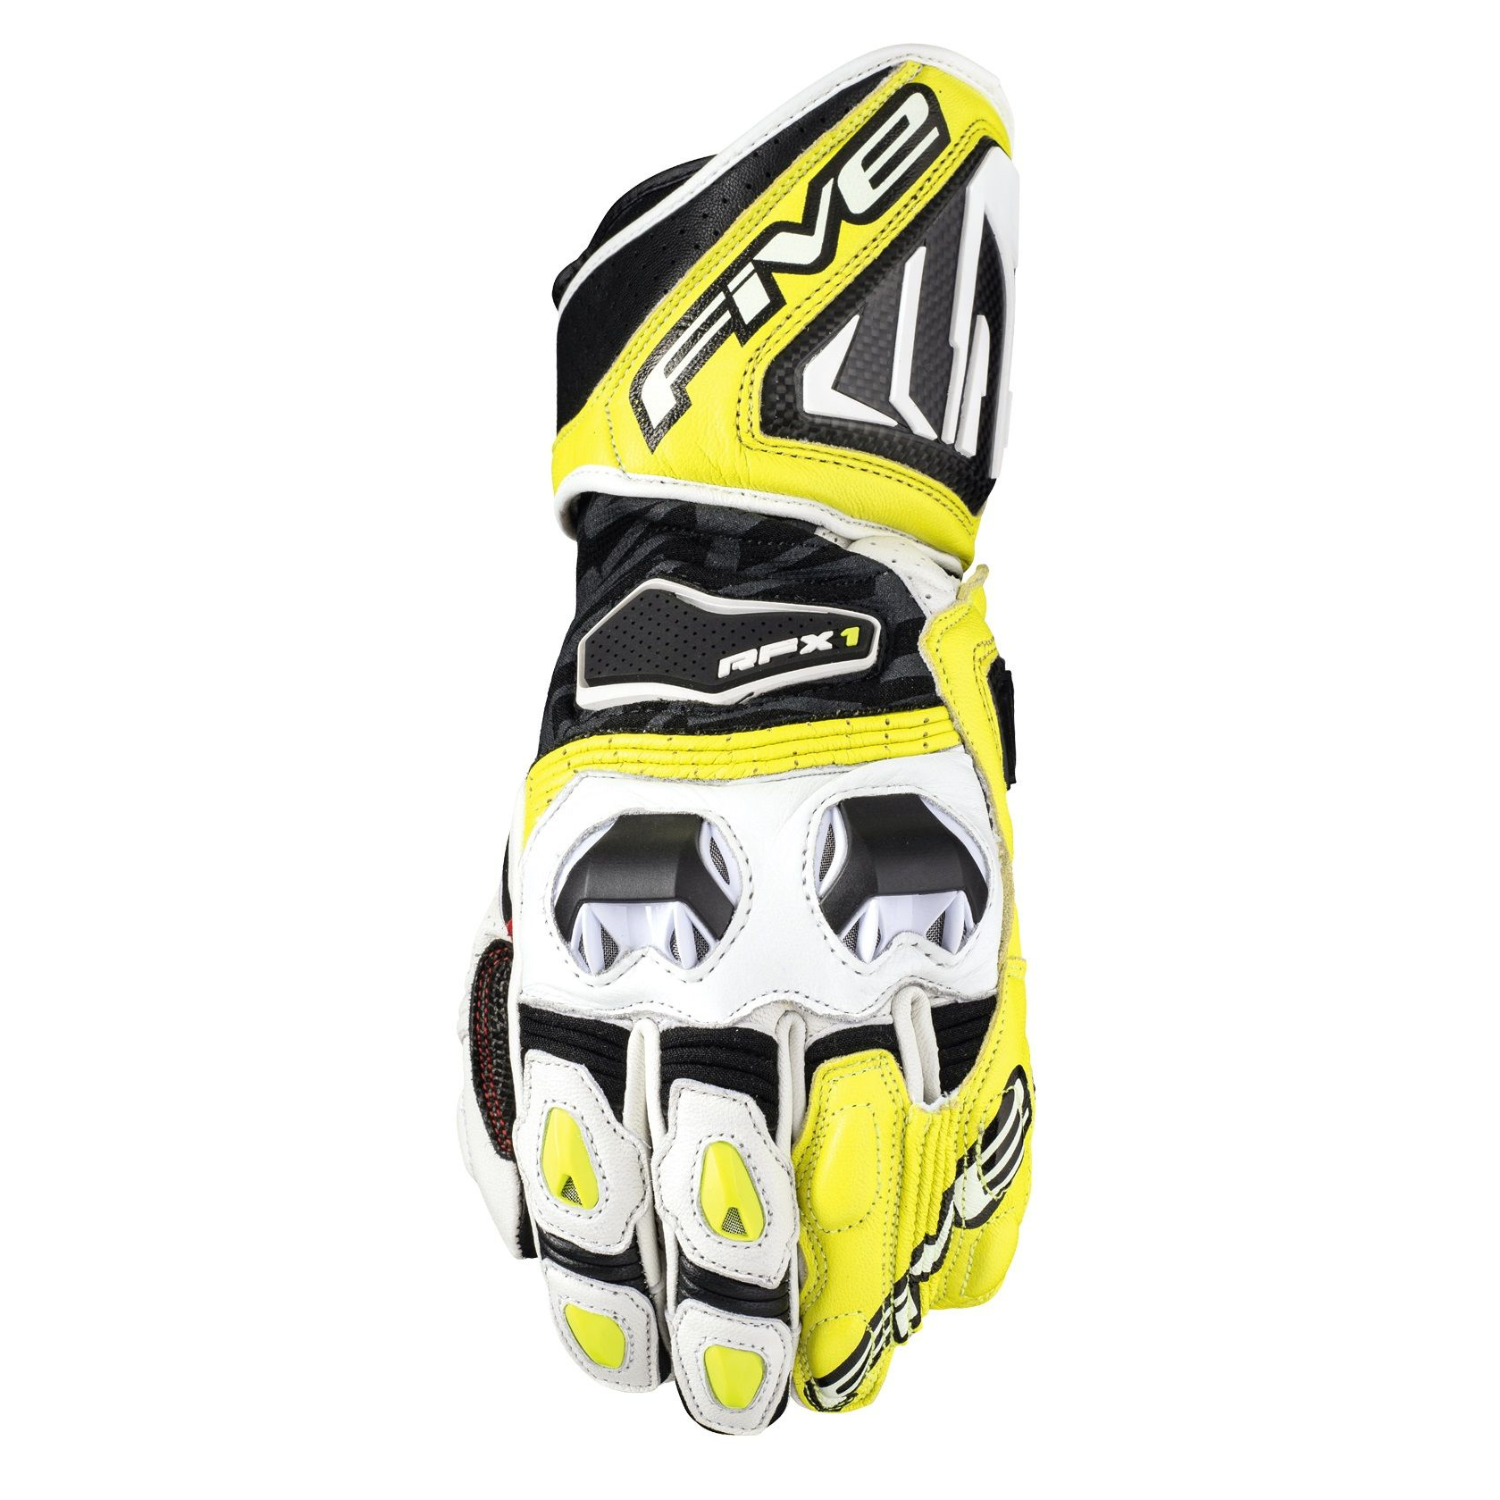 Image of Five RFX1 Gloves White Yellow Size XL ID 3882020012747